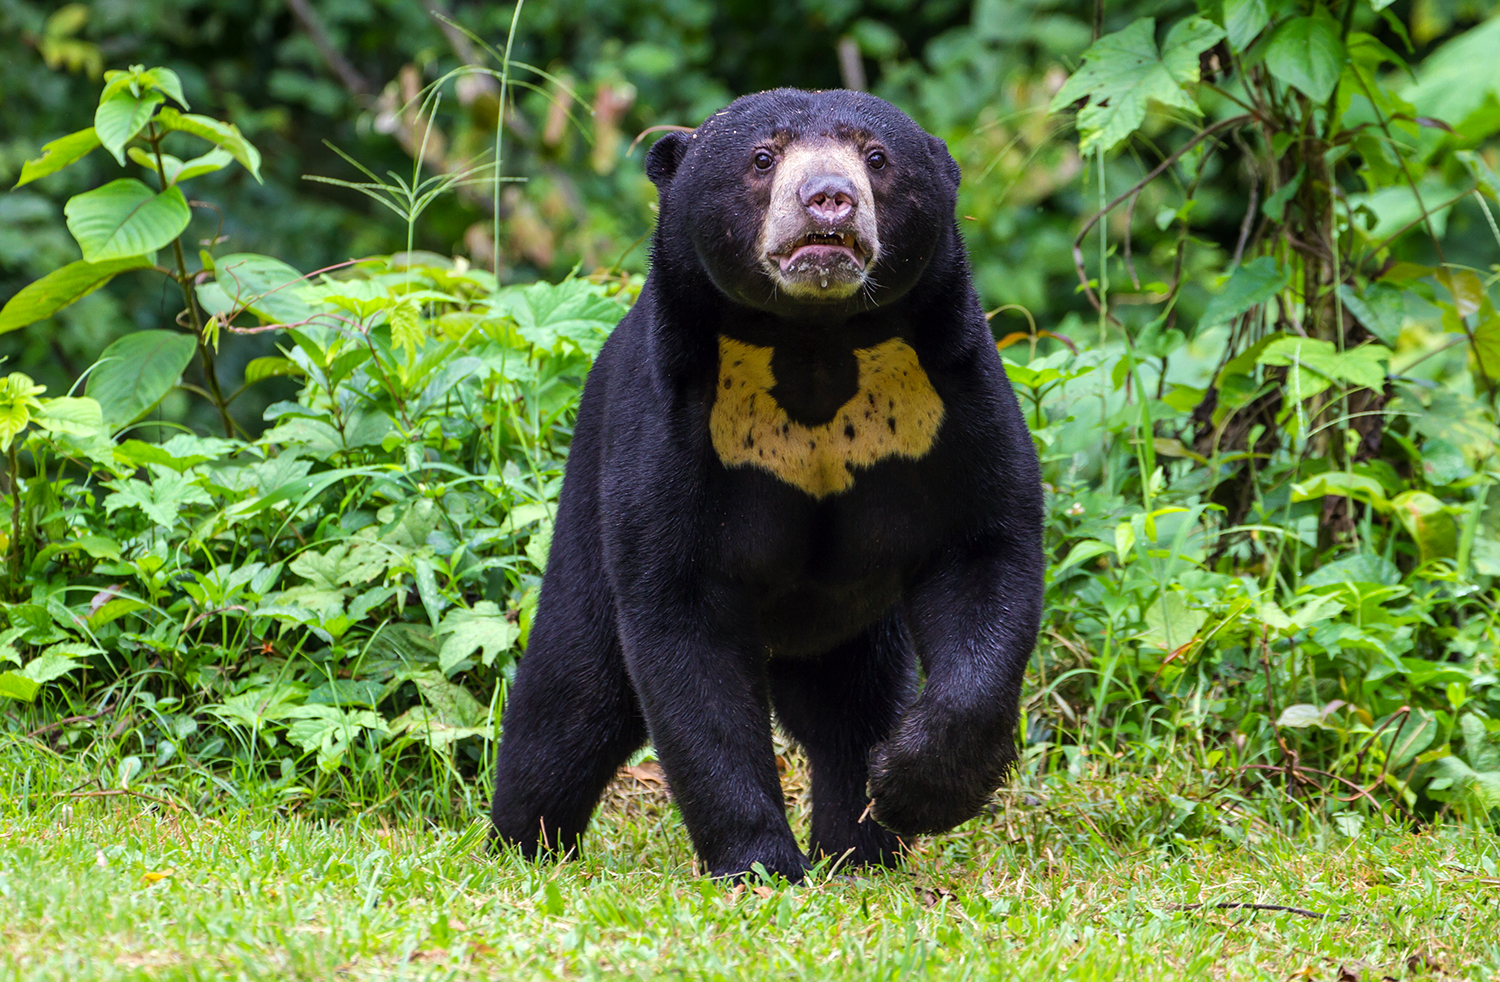 A sun bear stands on all fours in grass and looks at the camera.